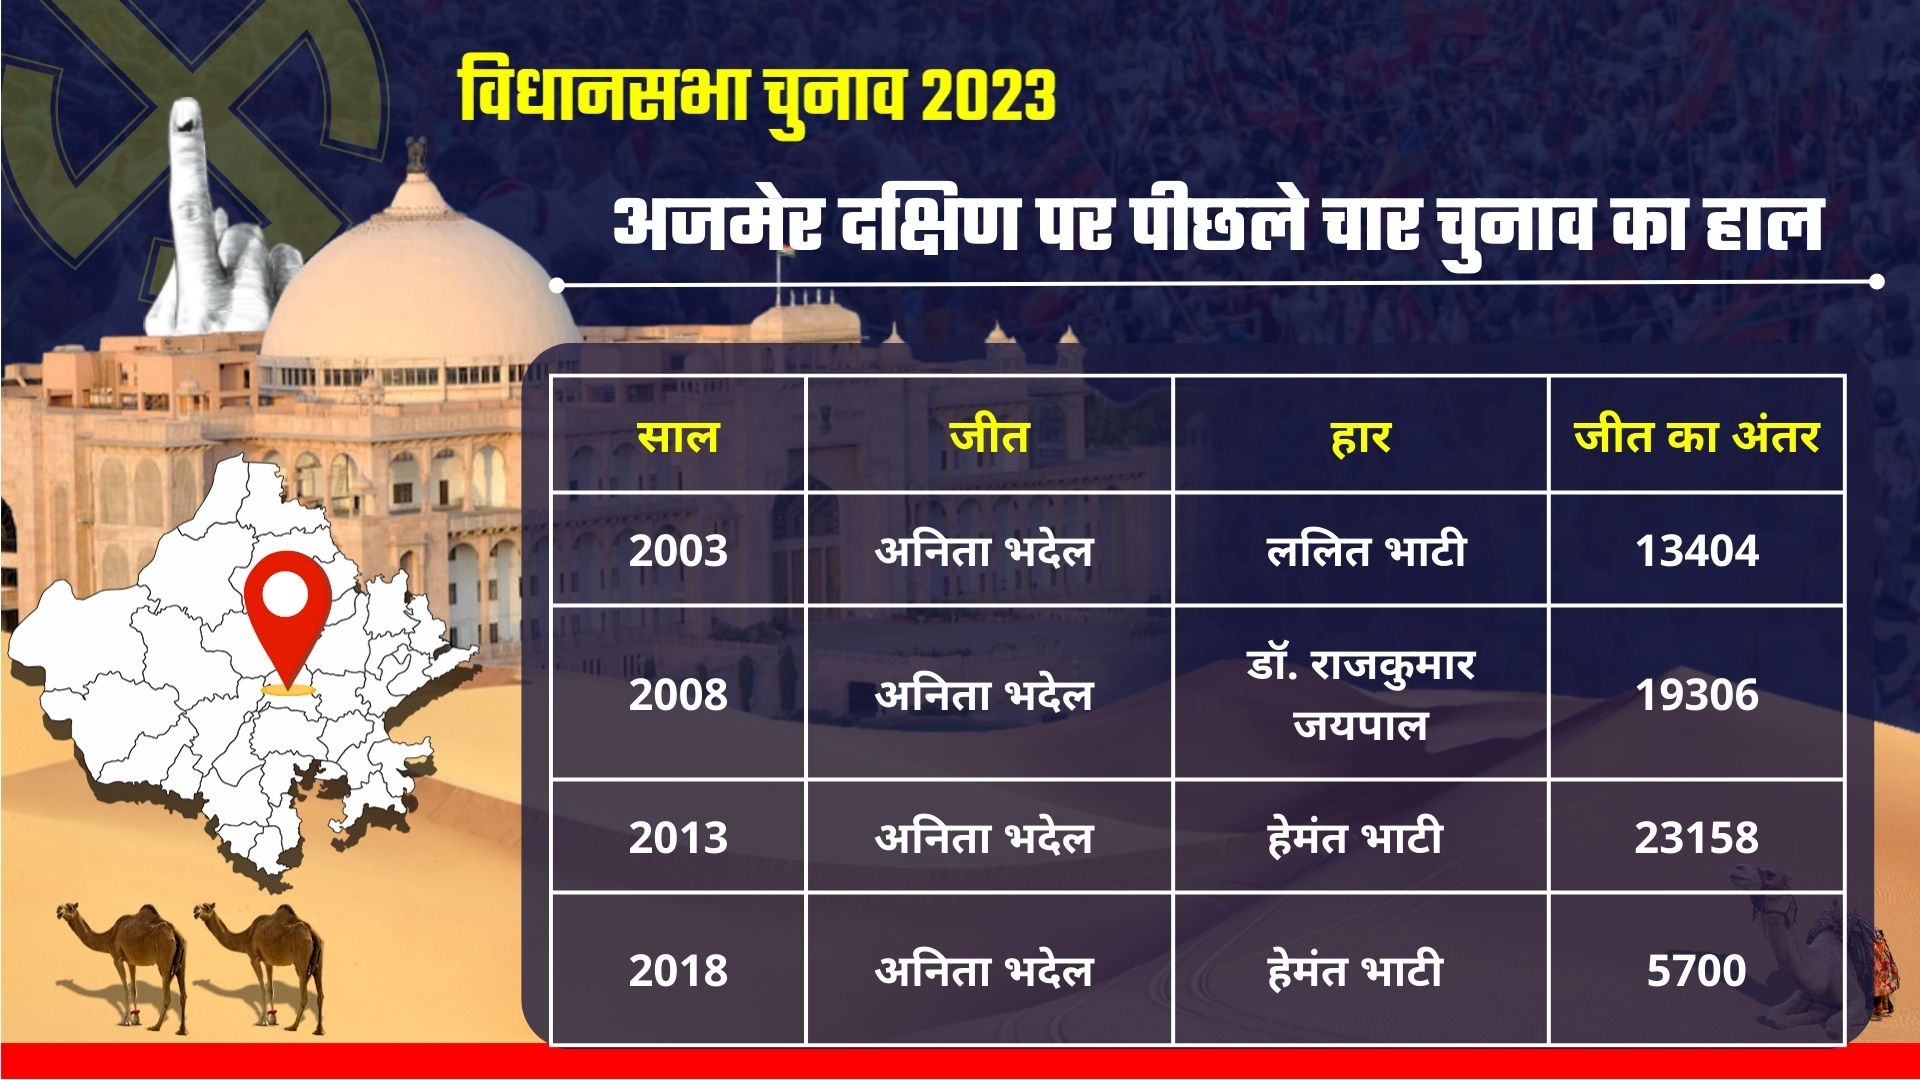 RAJASTHAN ASSEMBLY ELECTION 2023